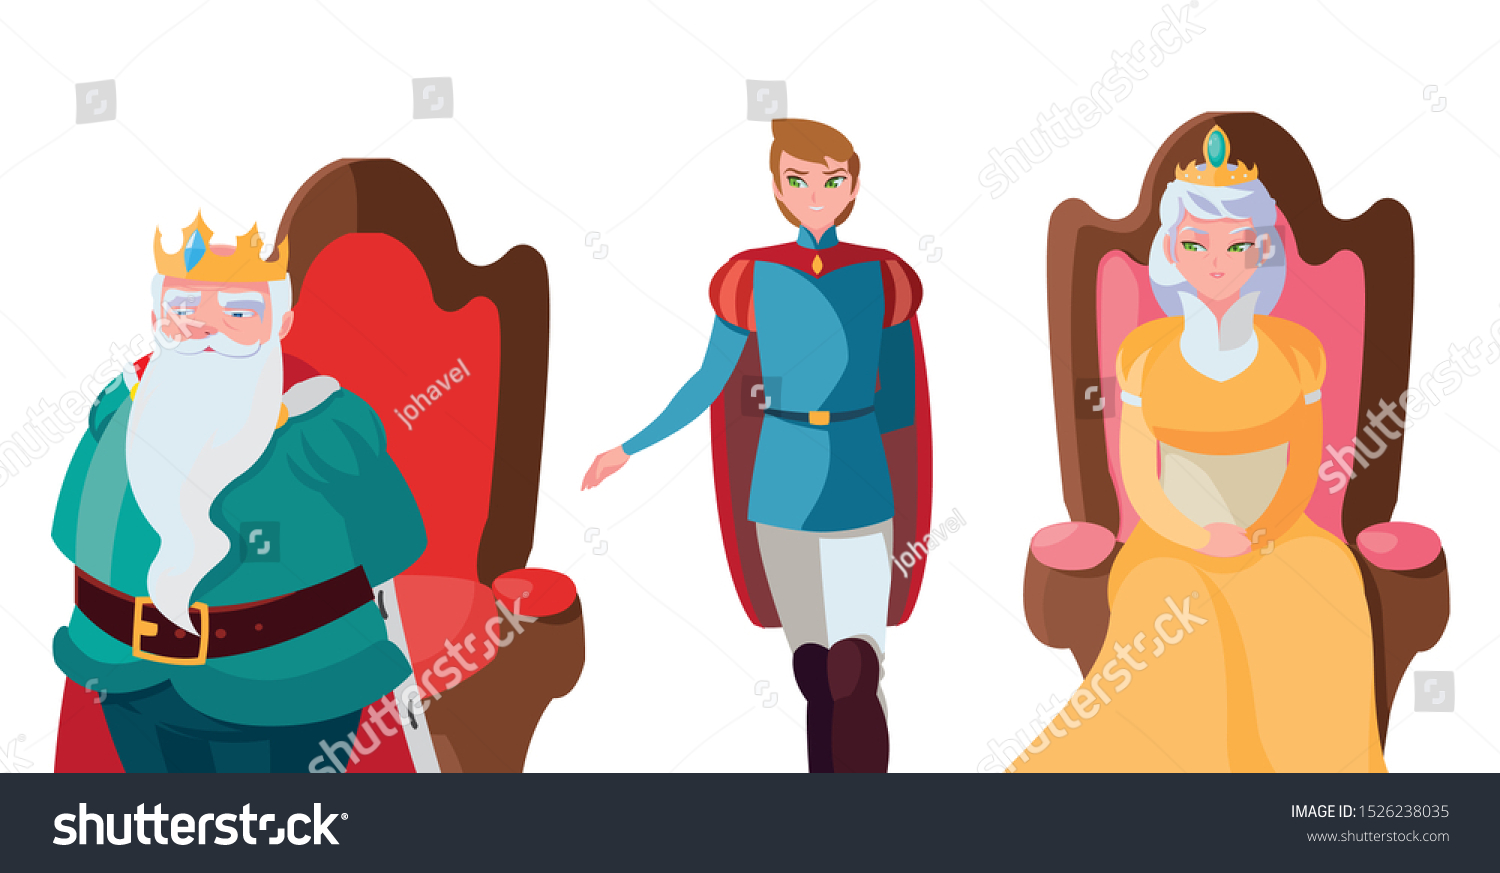 prince charming with queen and king on throne characters vector illustration design #1526238035